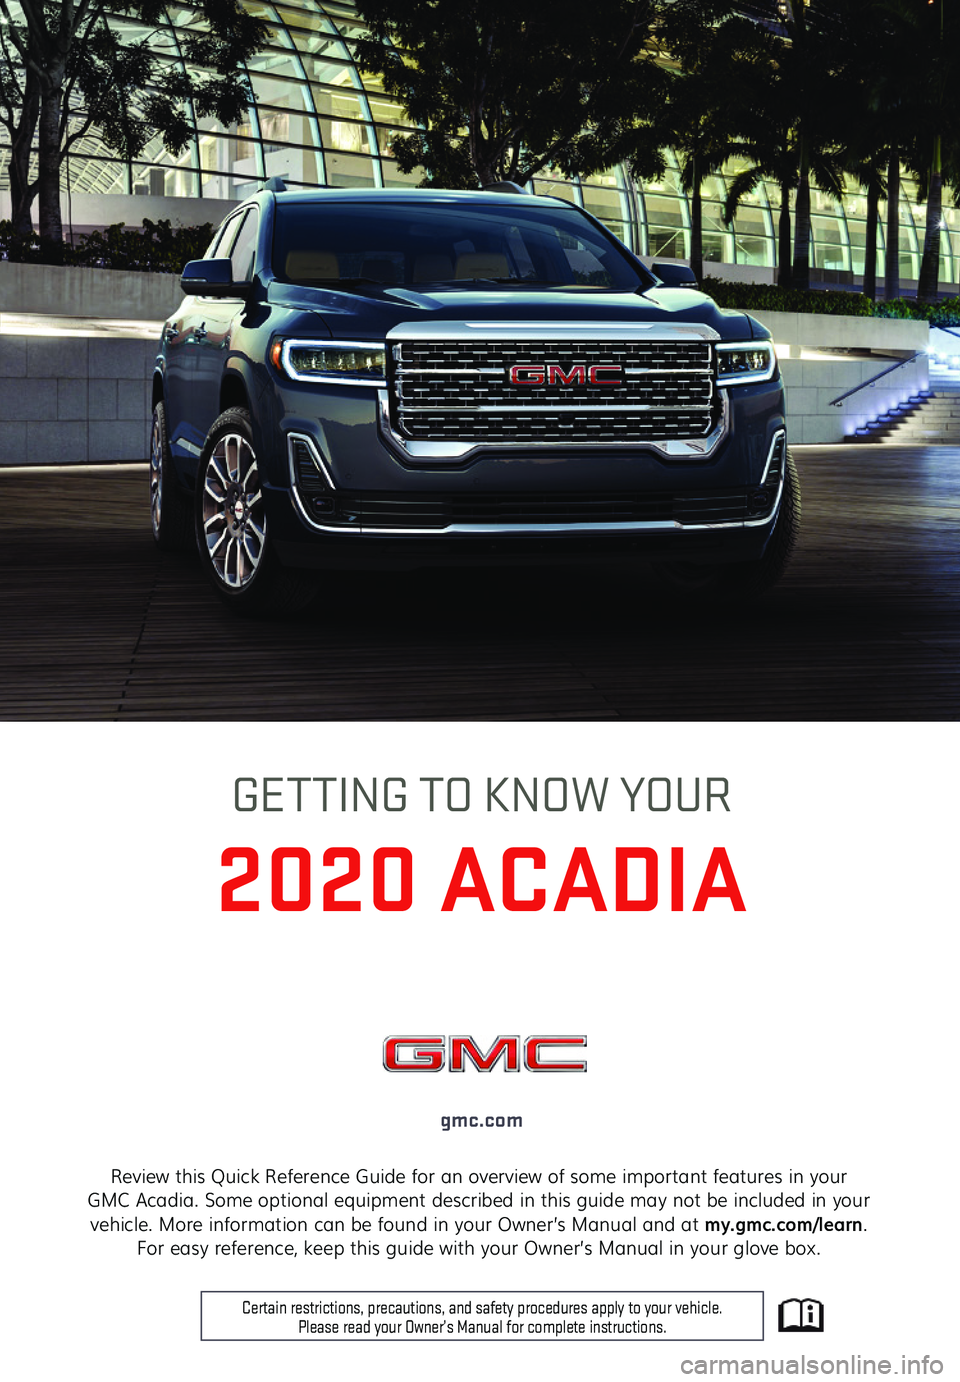 GMC ACADIA 2020  Get To Know Guide 